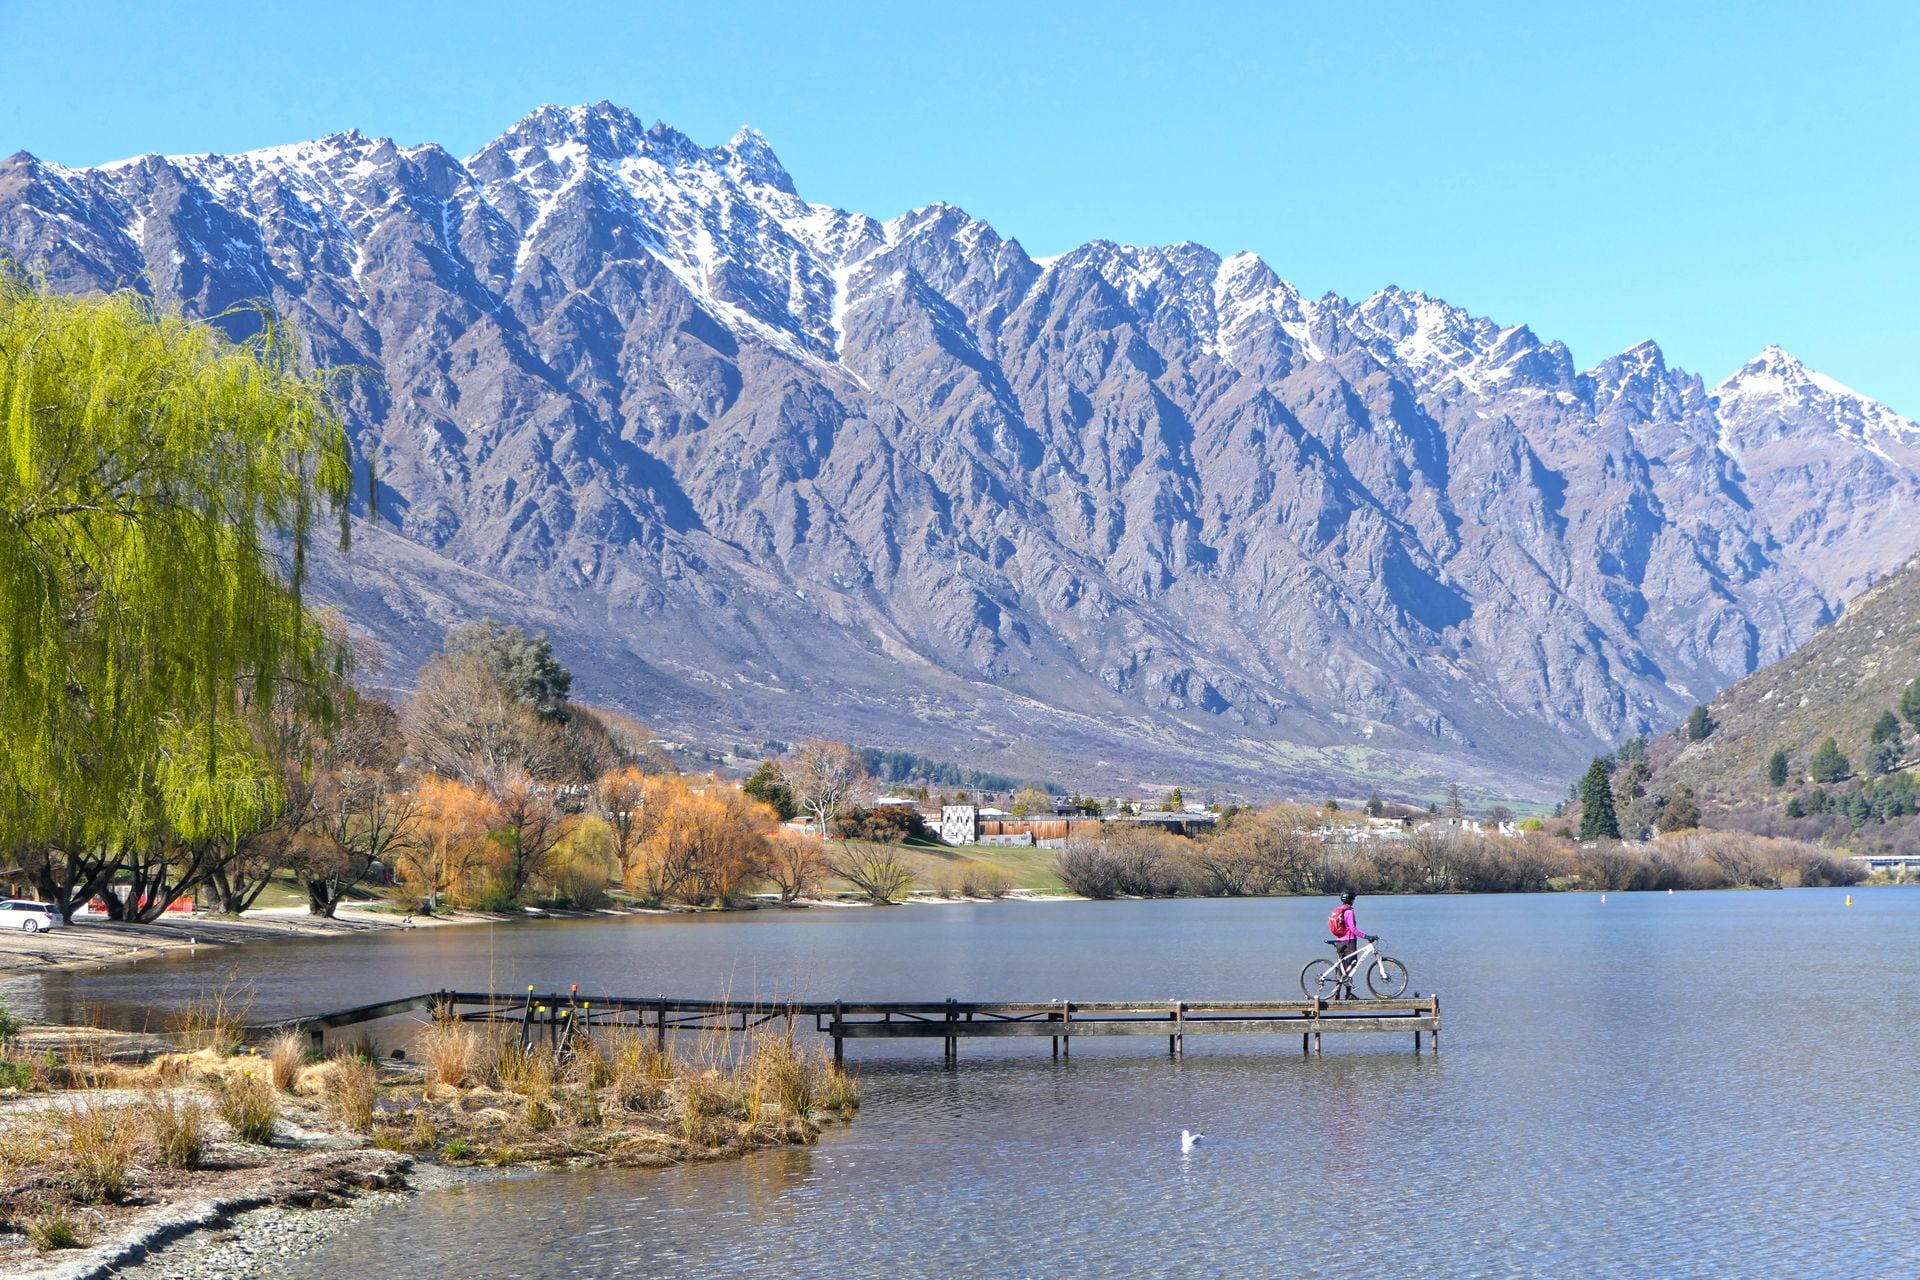 How to get to LOUIS VUITTON Queenstown by Bus?